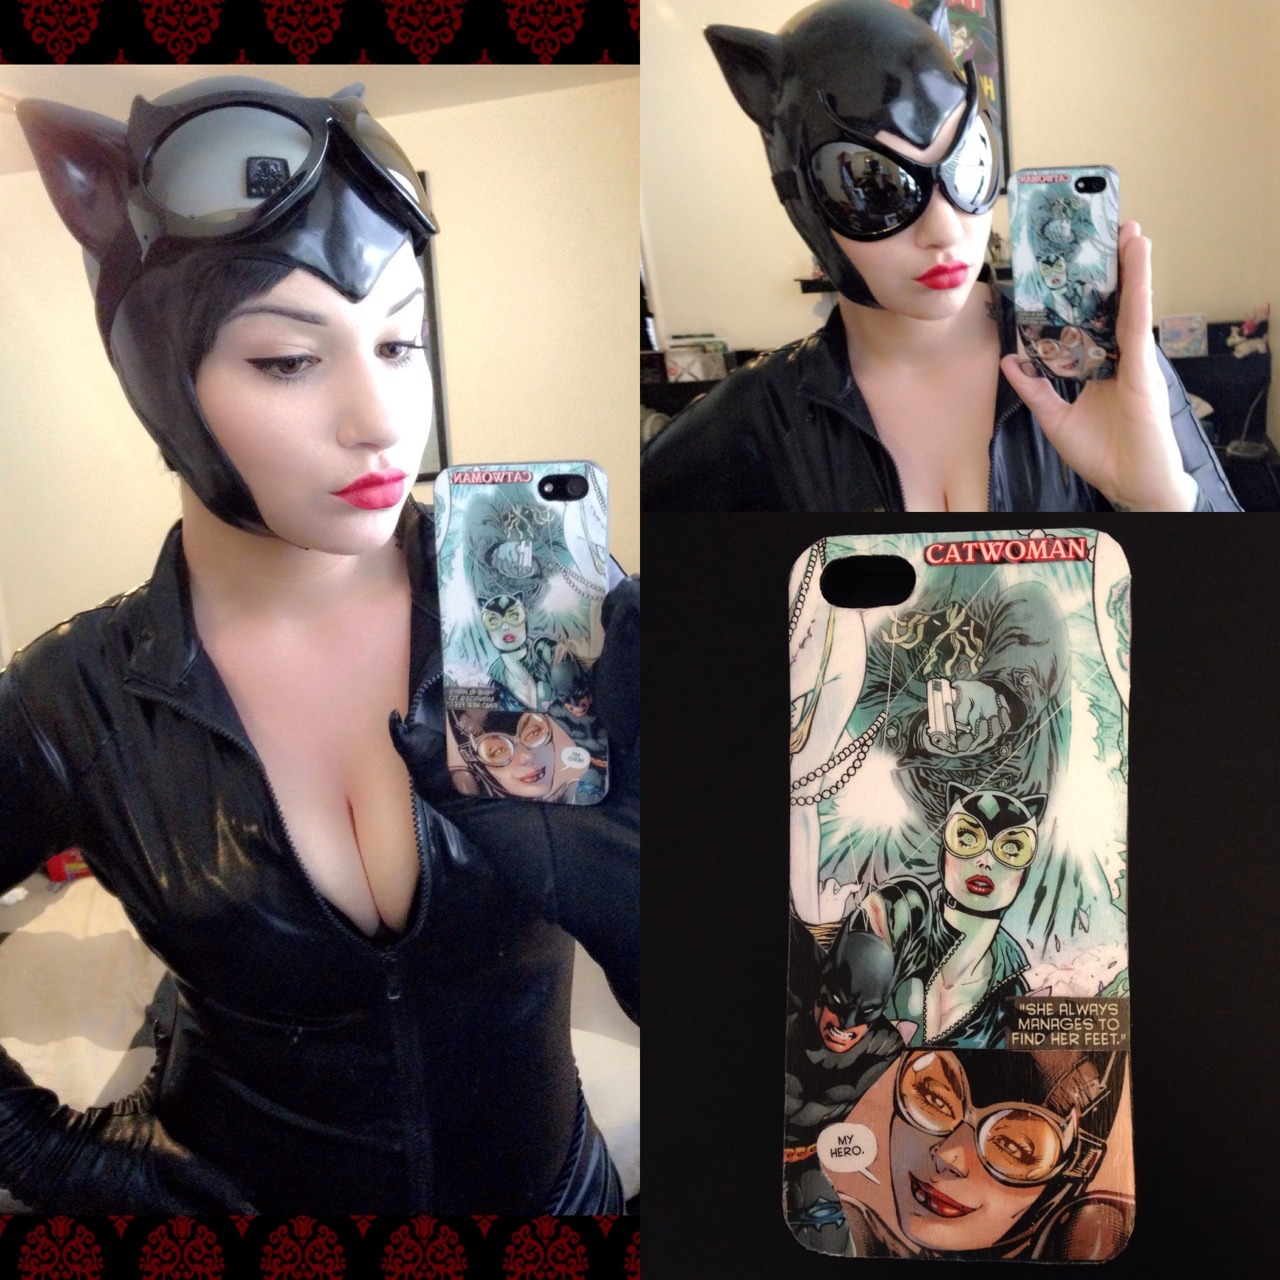 Kisstini Made A Catwoman Phone Case So 